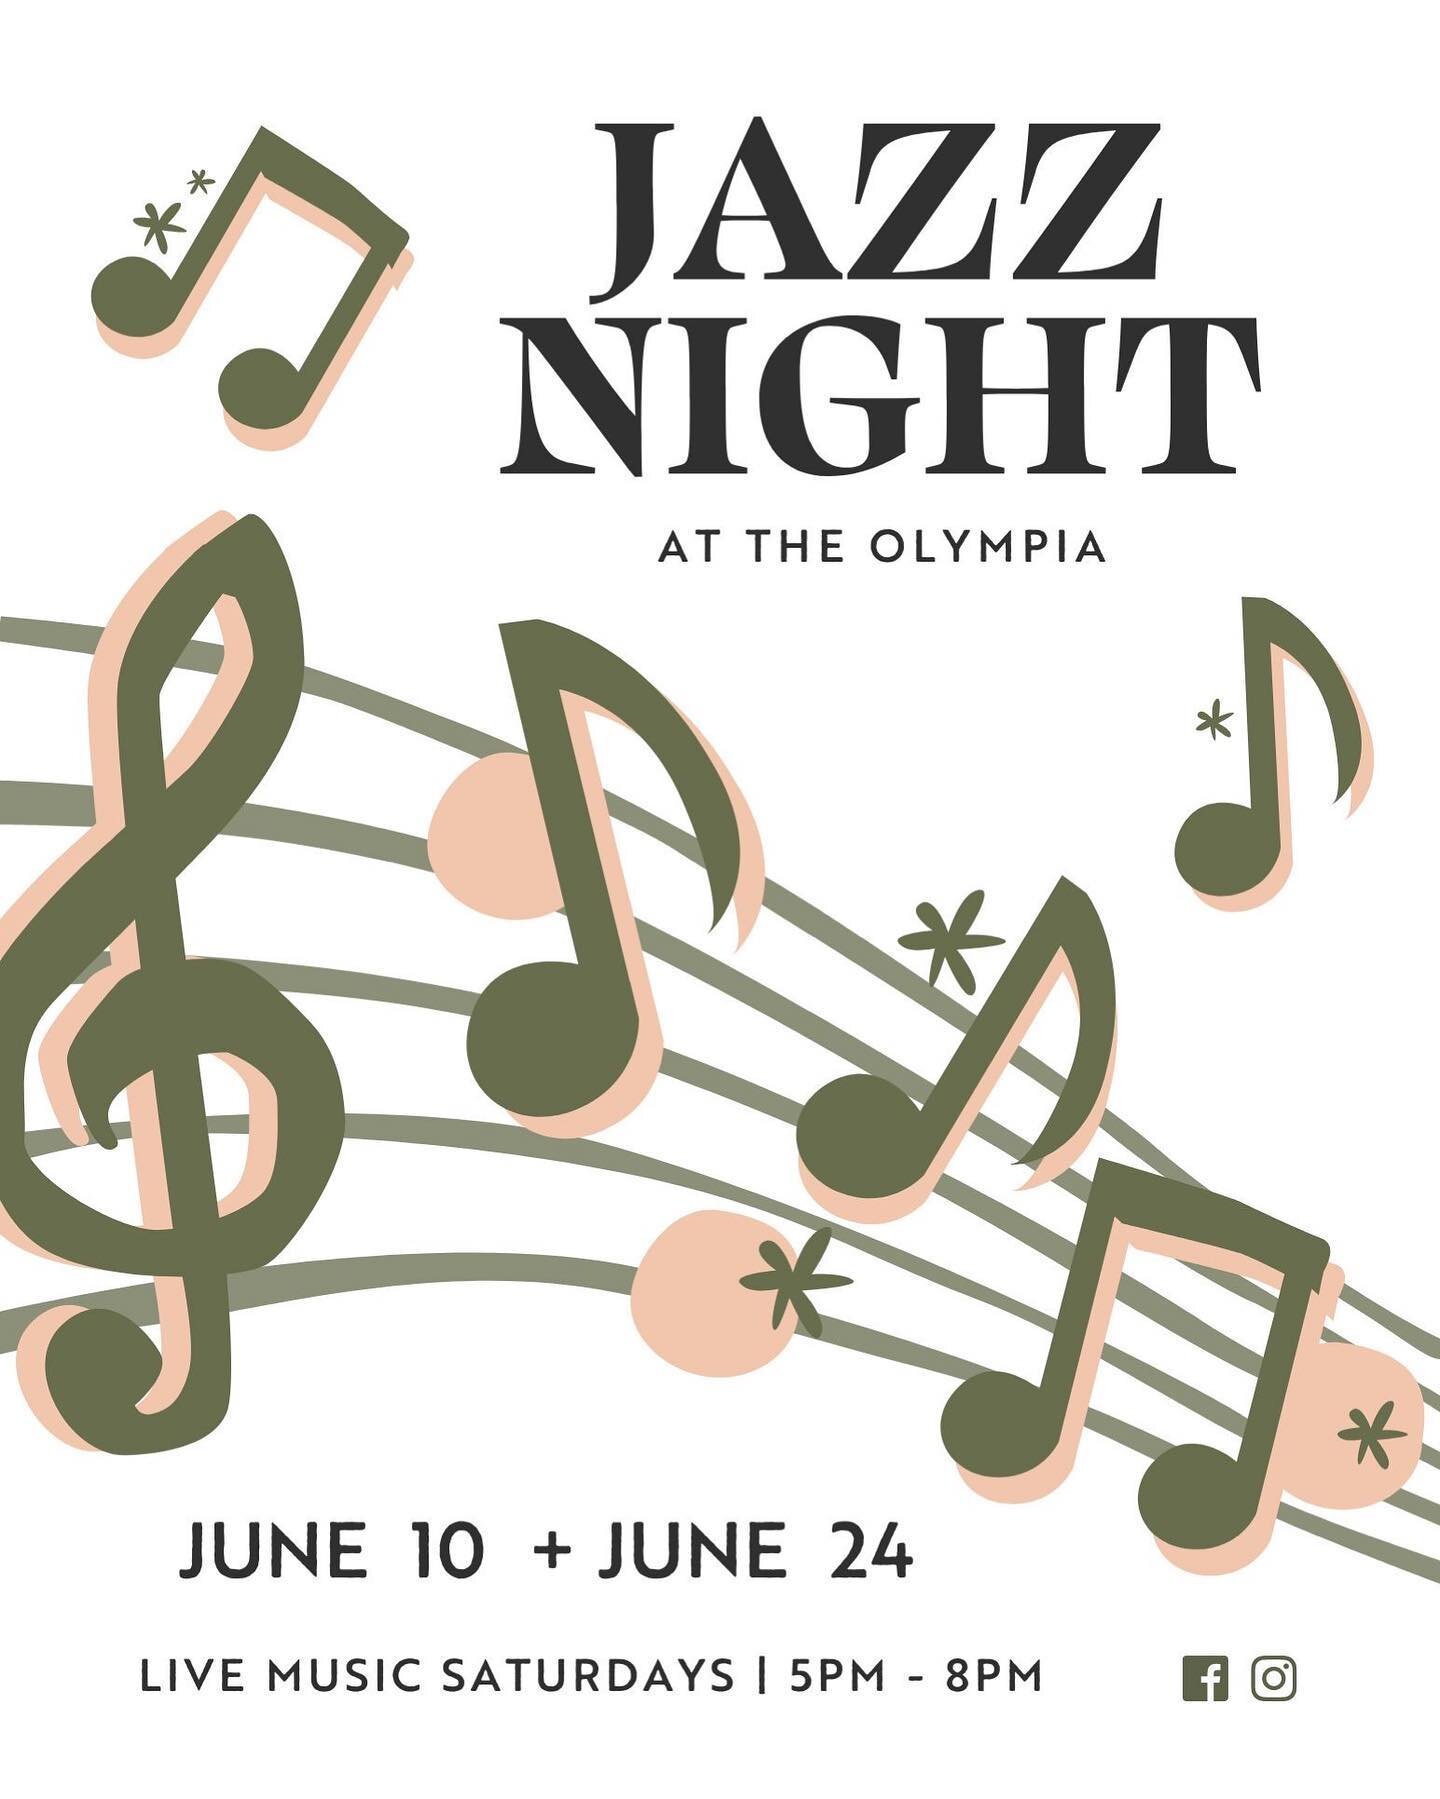 We&rsquo;re back to Jazz nites for June! Book your table for a fun night out.
Stay tuned for more dates July and August!